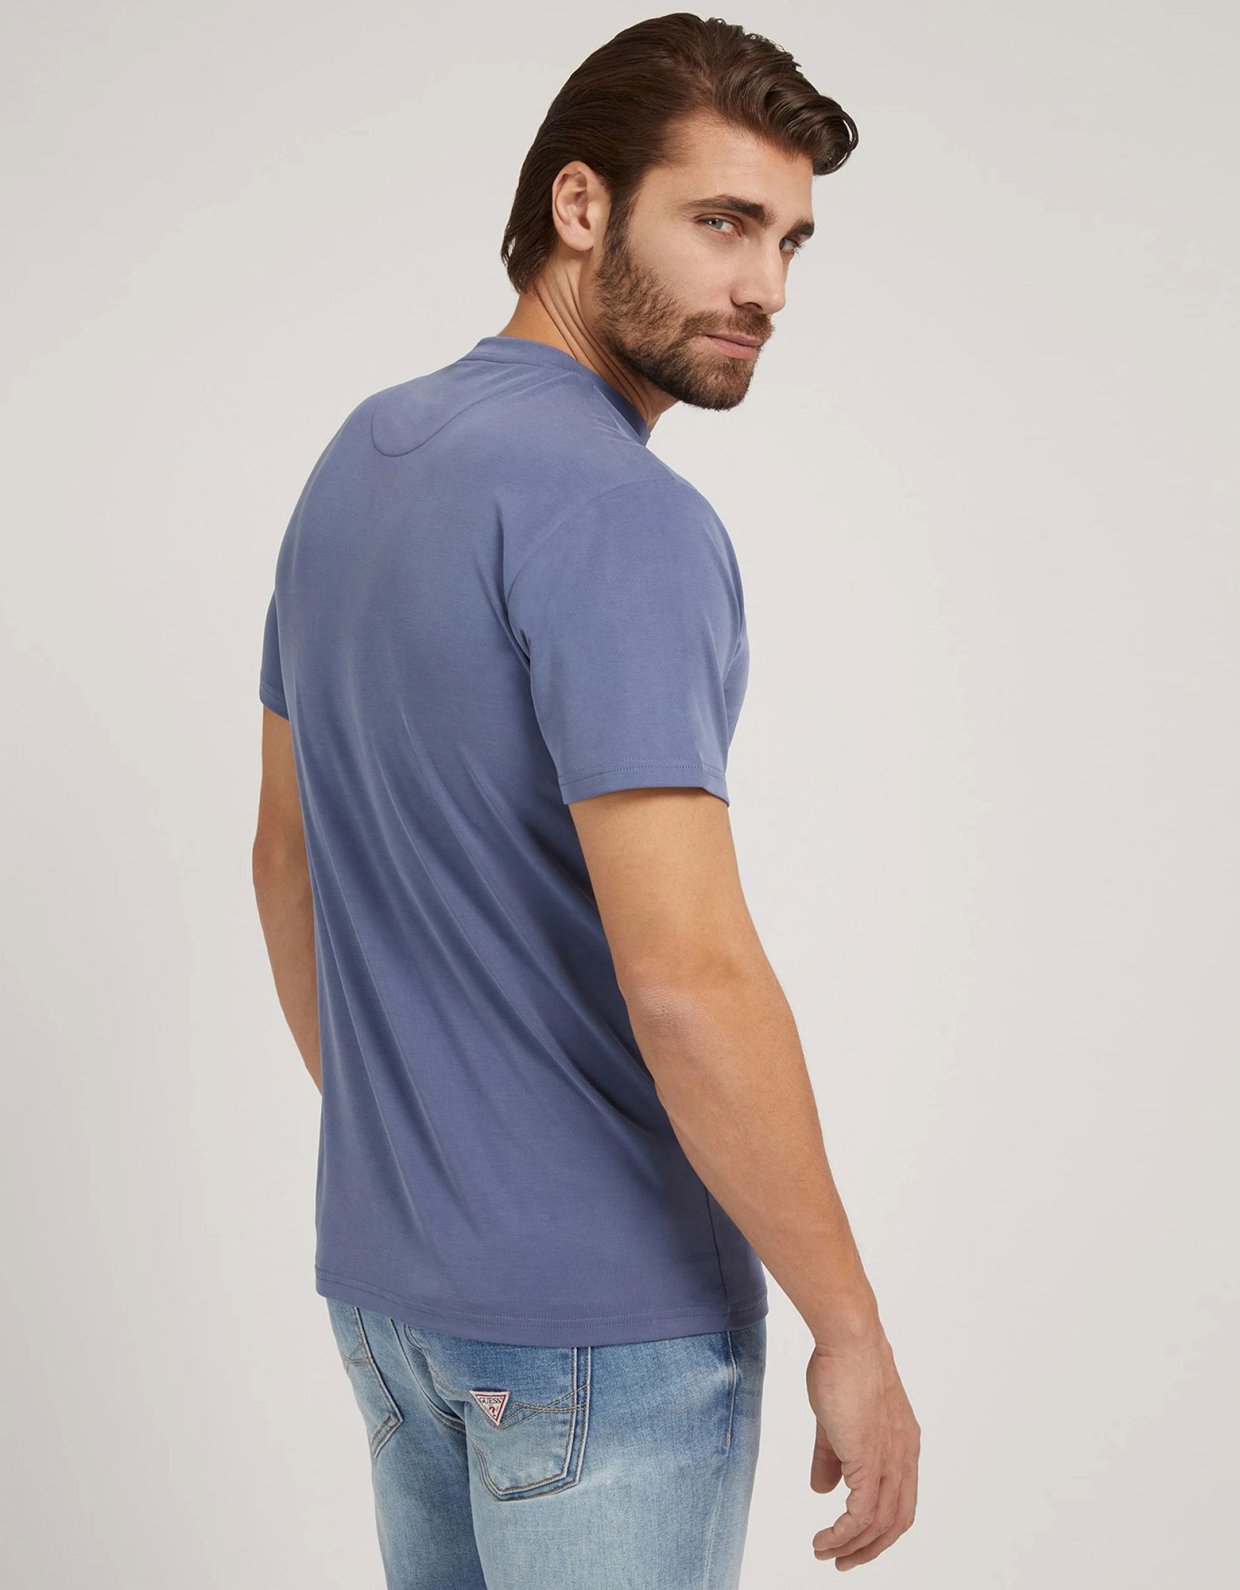 Guess Orio SS tee blue